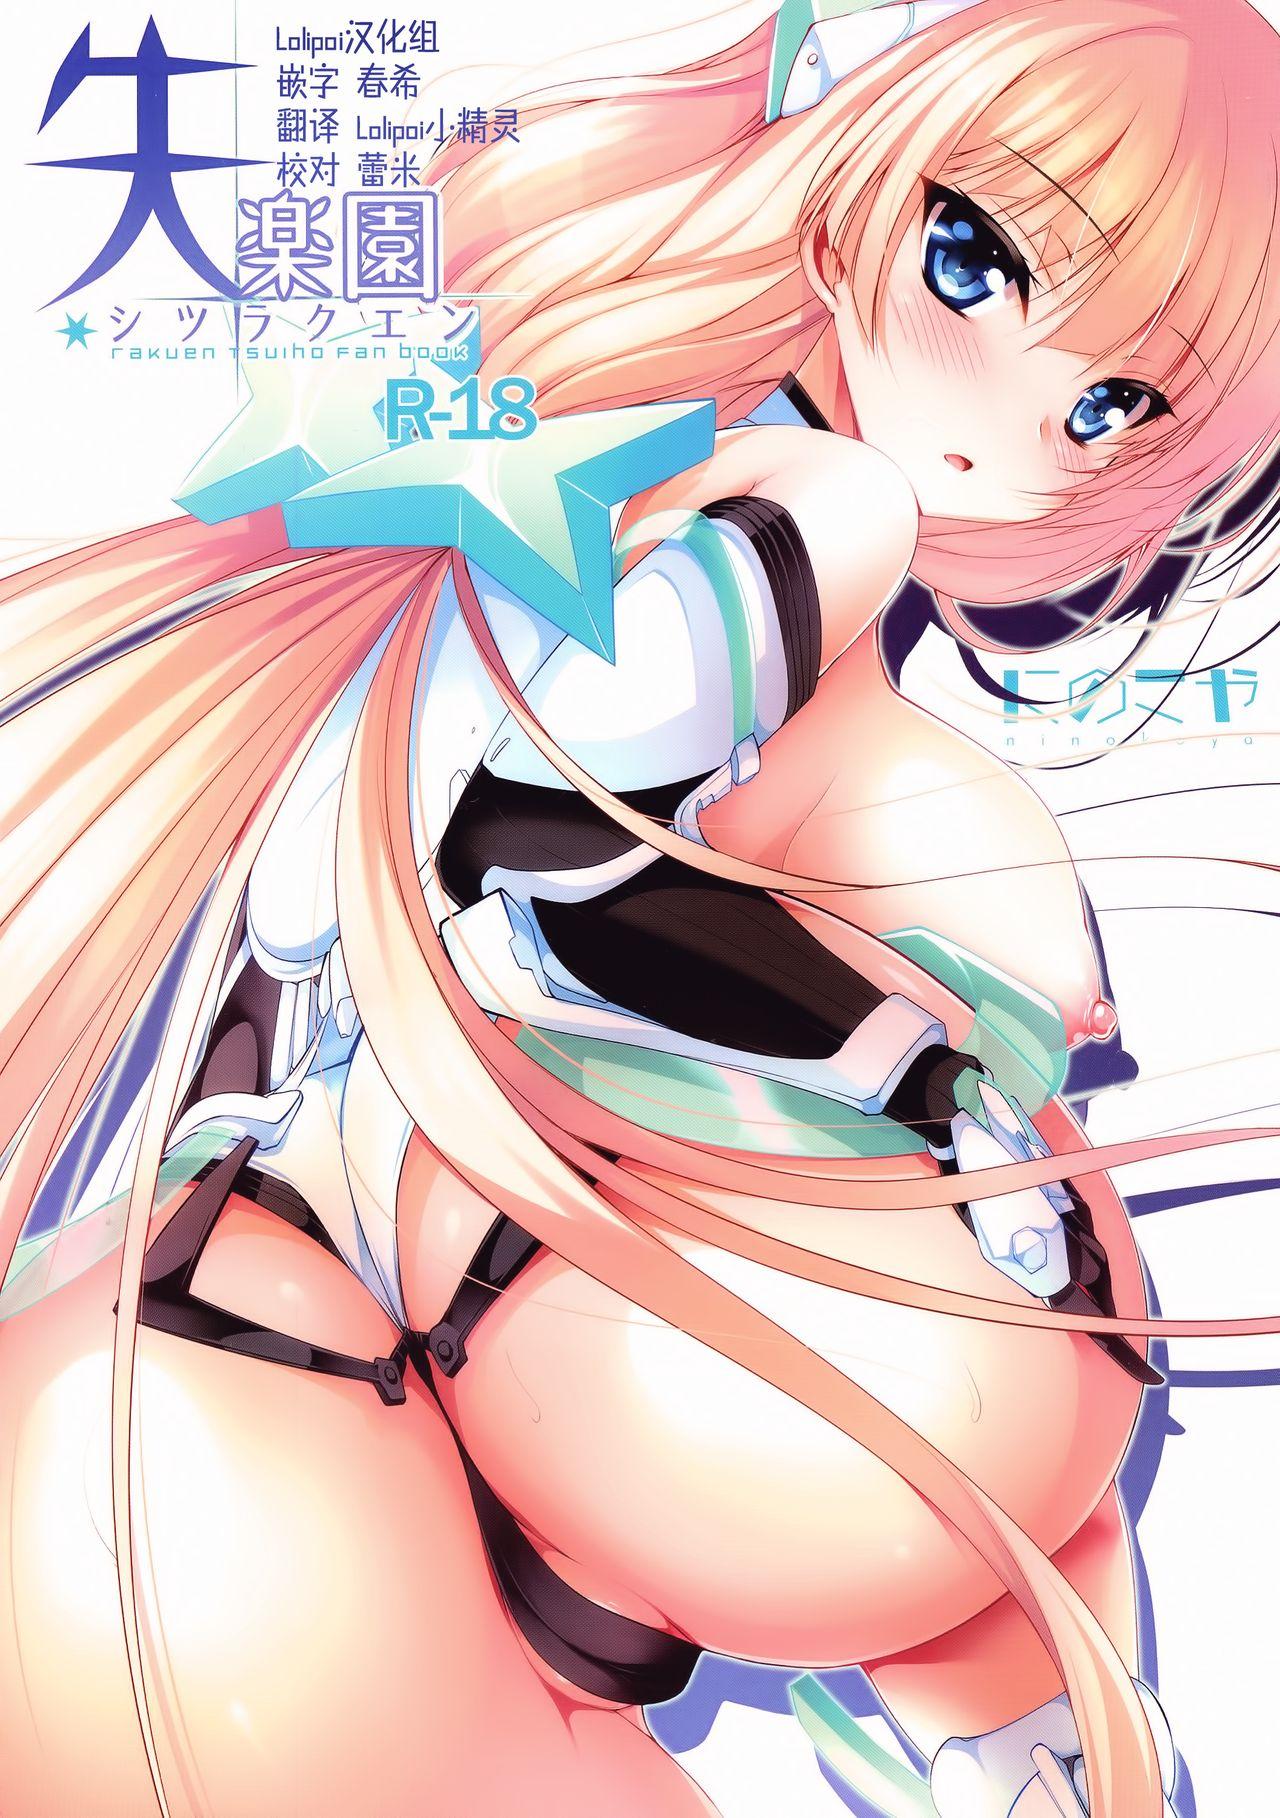 Peitos Shiturakuen - Expelled from paradise Buttfucking - Picture 1